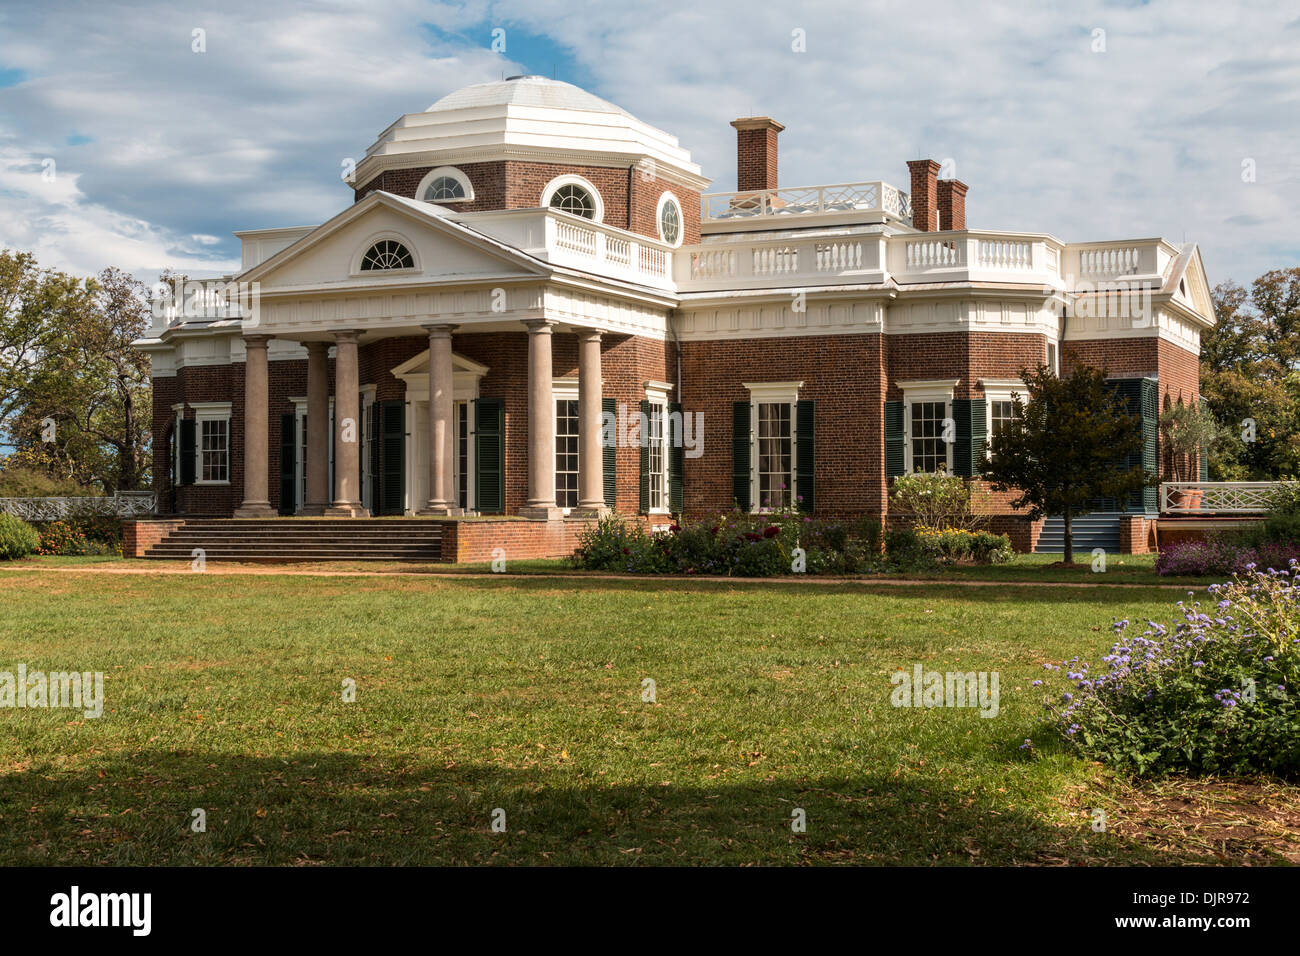 Monticello Plantation and World Heritage site, home of Thomas Jefferson, third president of the United States, in Charlottesville, Virginia. Stock Photo